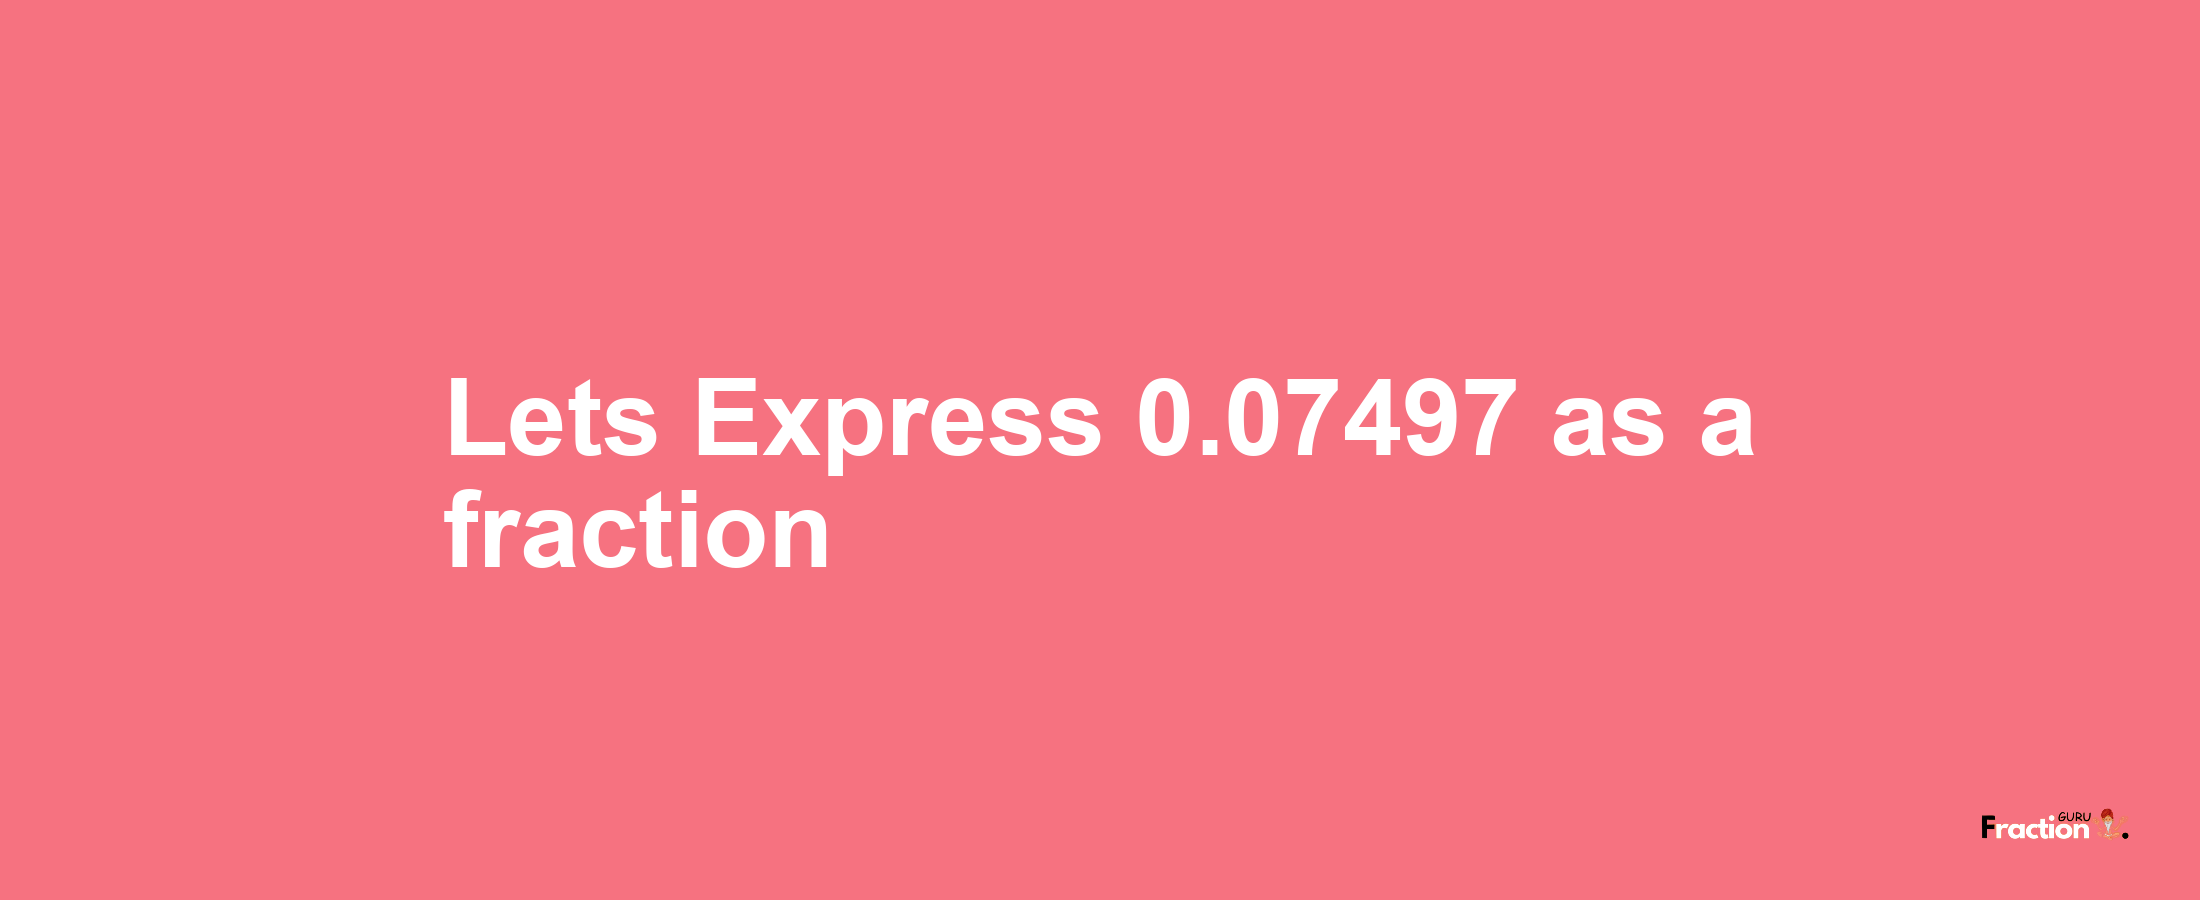 Lets Express 0.07497 as afraction